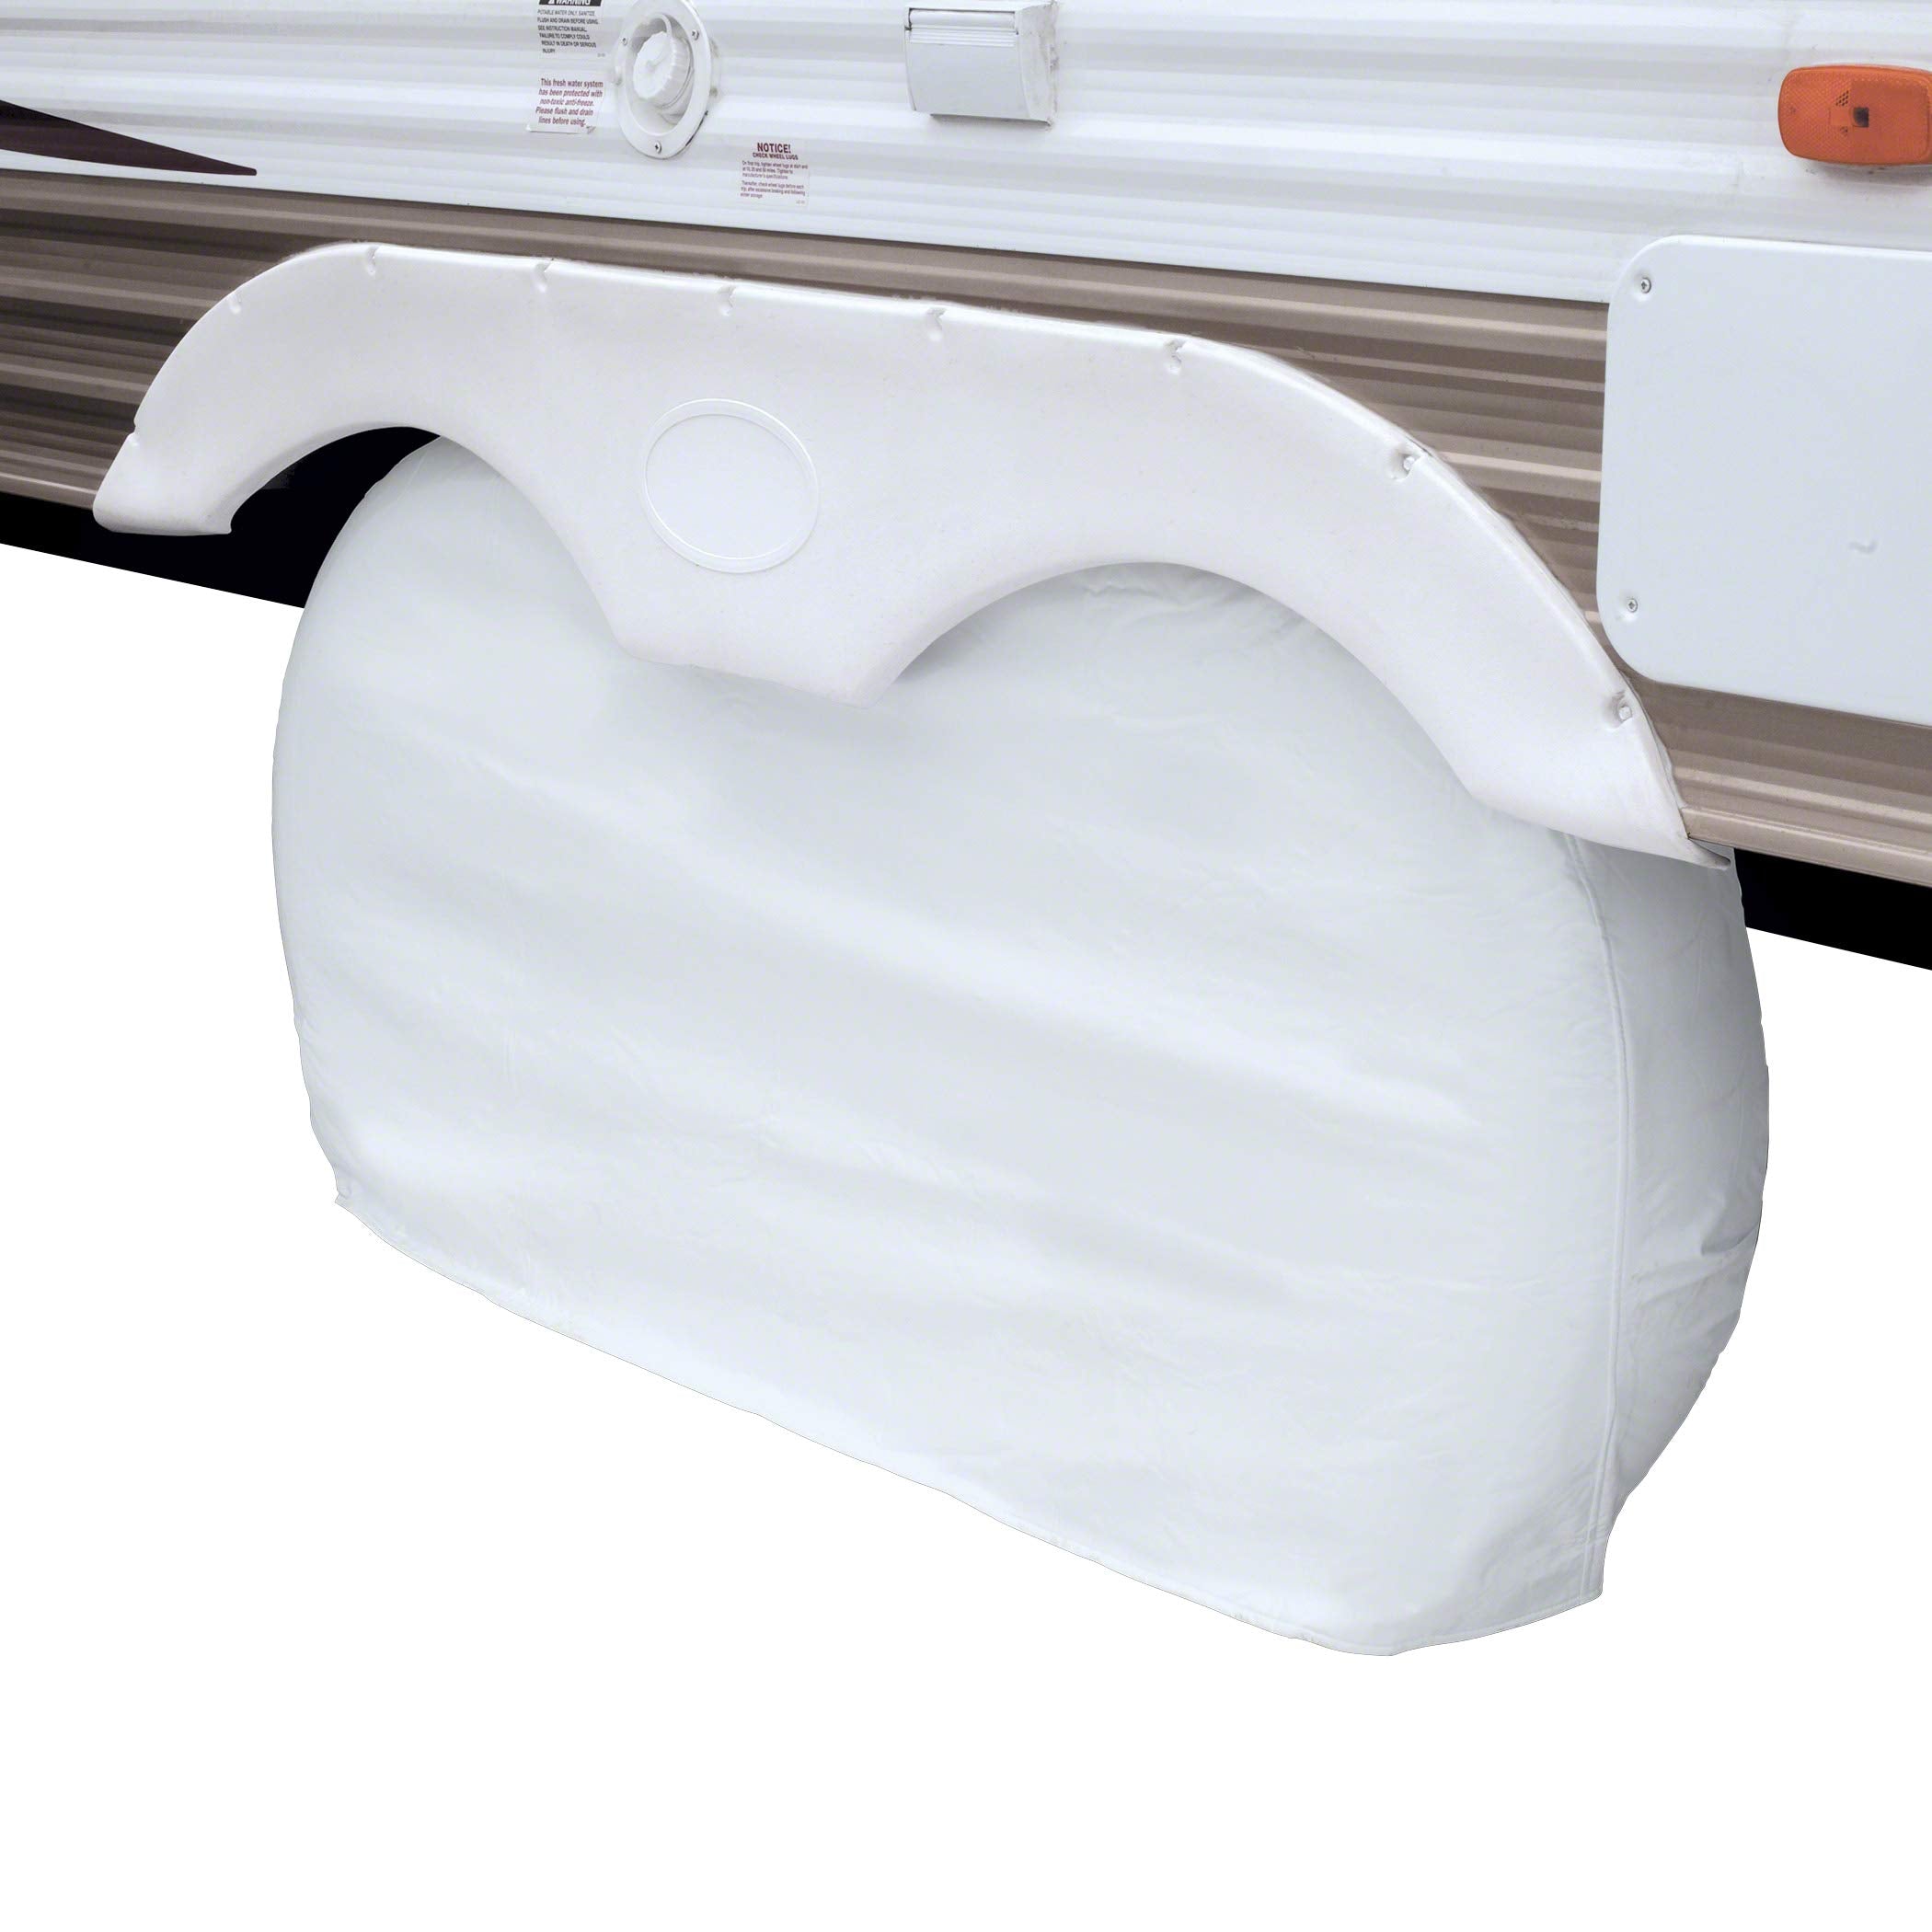 Classic Accessories OverDrive RV Cover - Dual Axle Wheel Covers, Wheels up